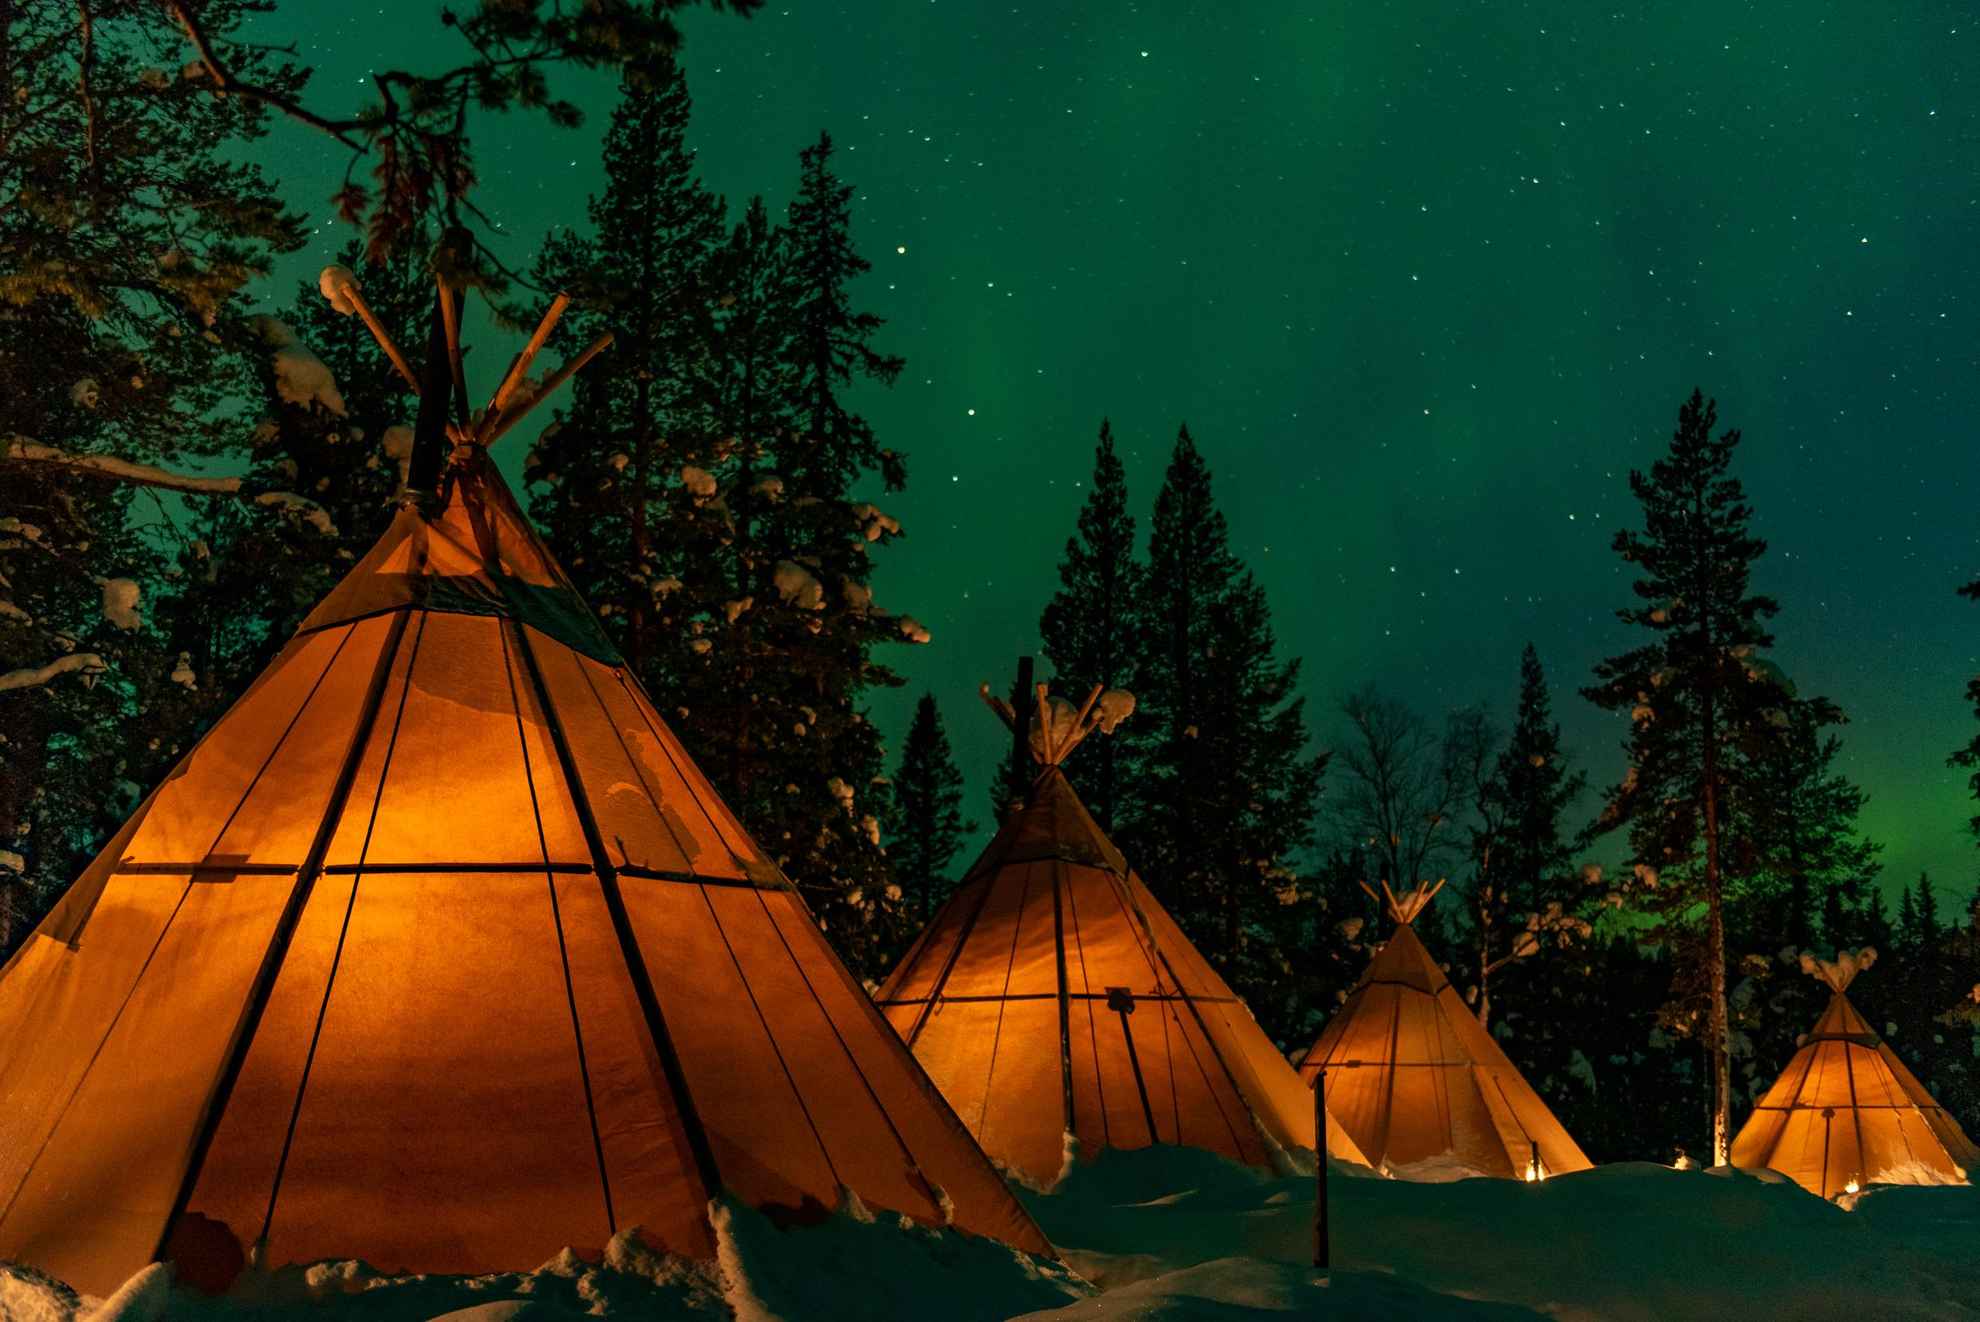 Four lavvu tent at a nature camp in Lapland. It’s a starry night in a snowy landscape and the light glows in the tents.